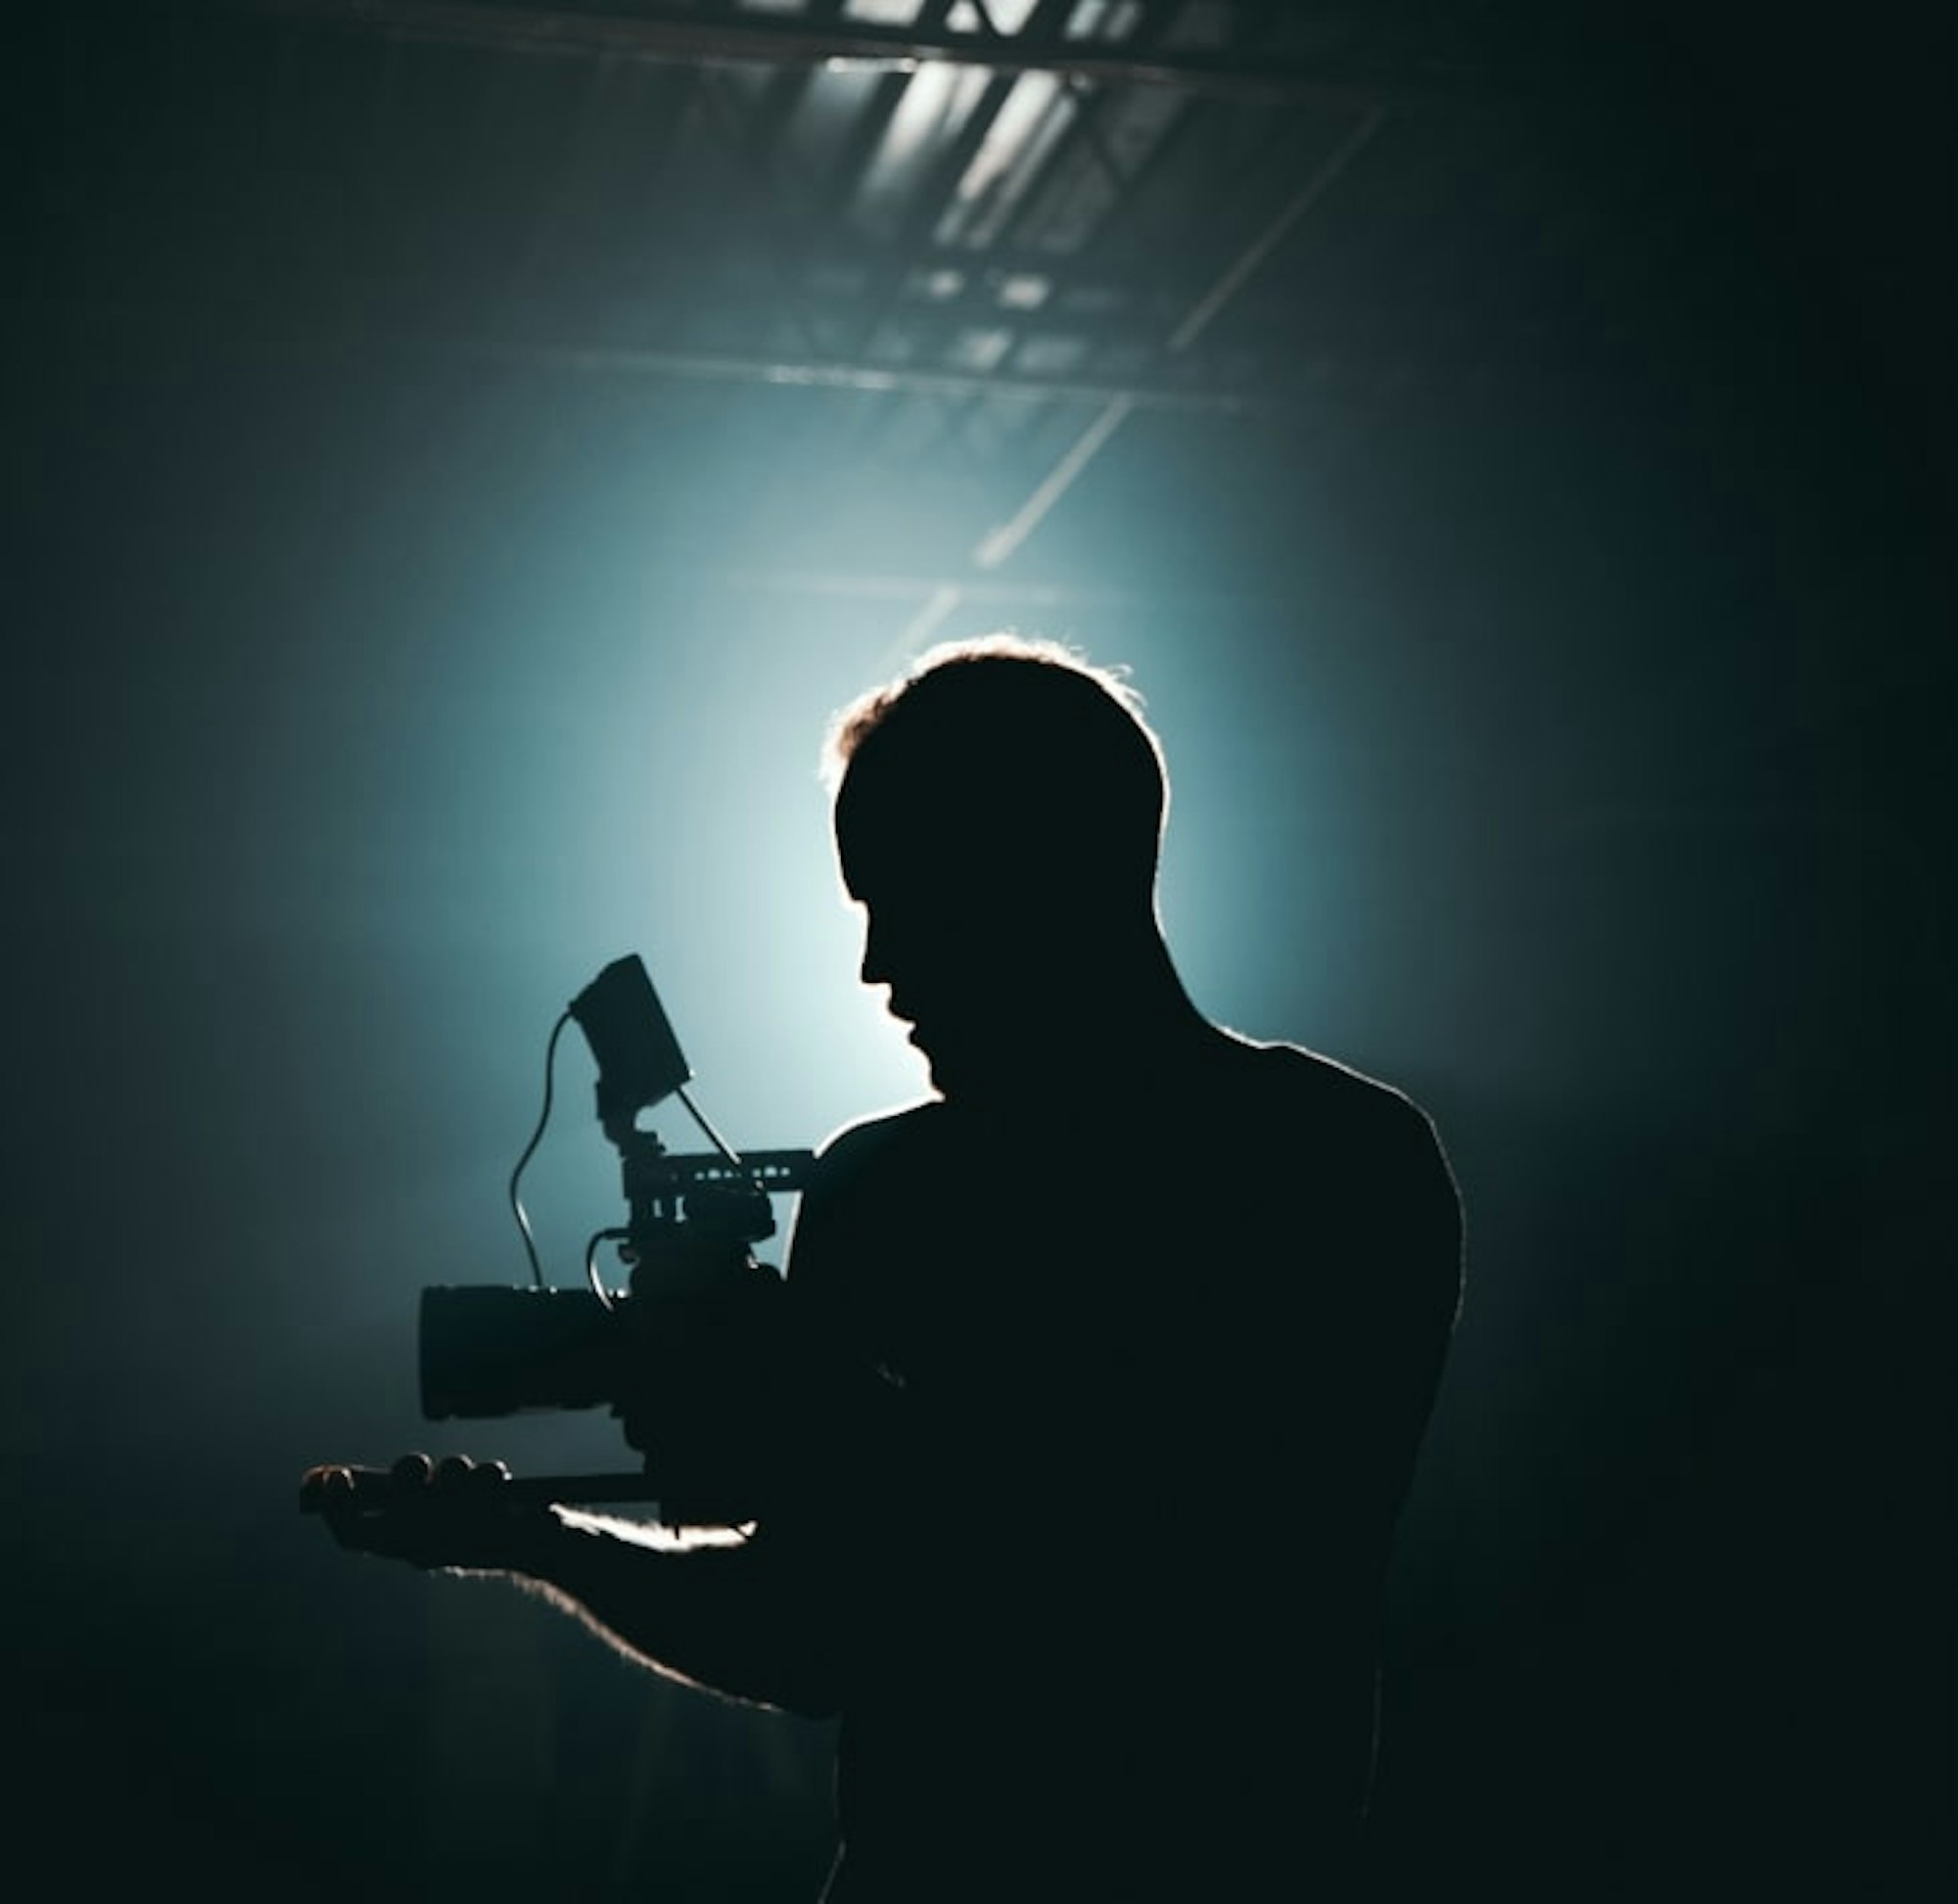 A silhouette of a man holding a camera in front of a light source